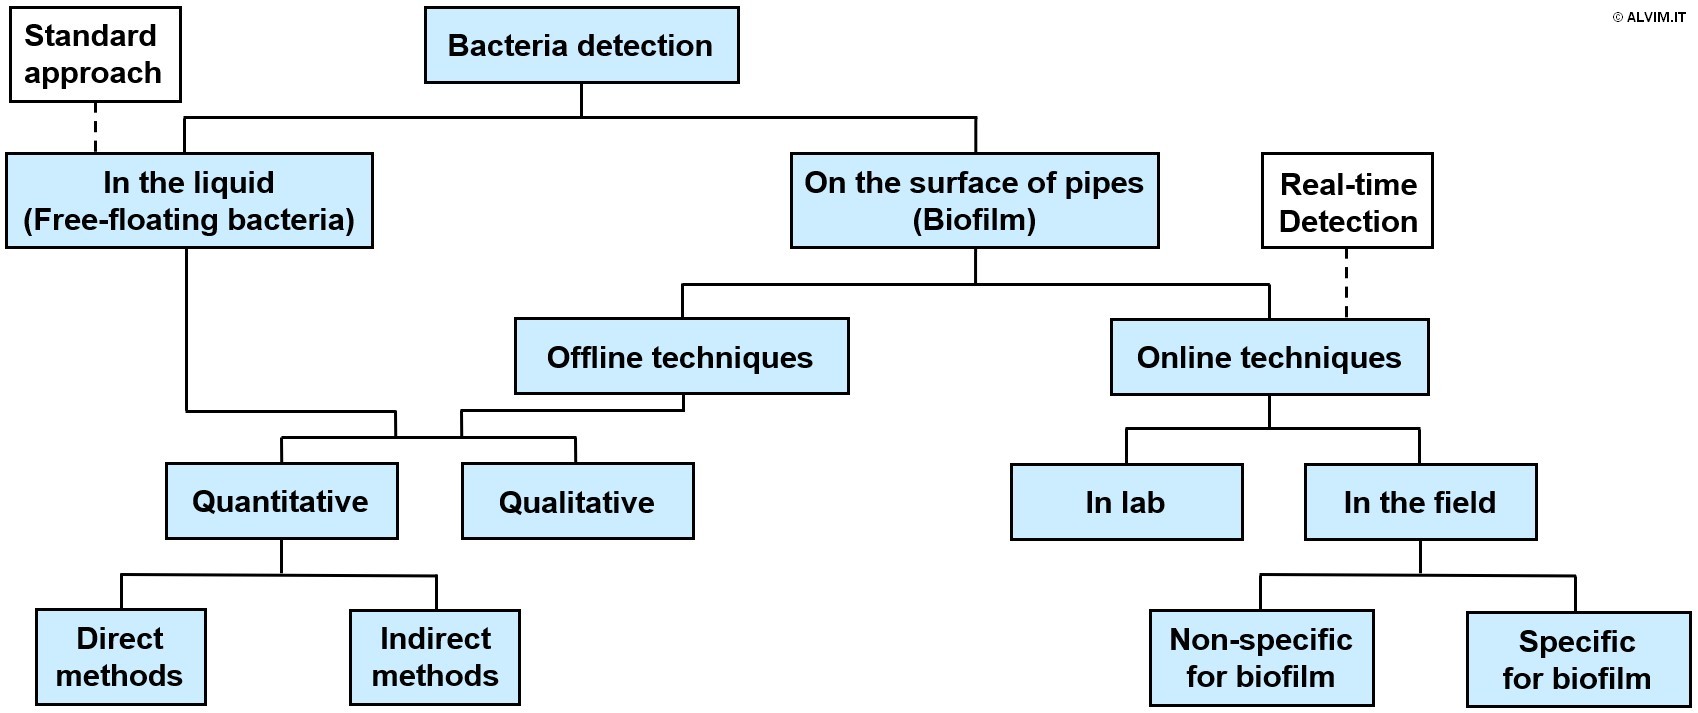 Different categories of bacteria detection methods and techniques